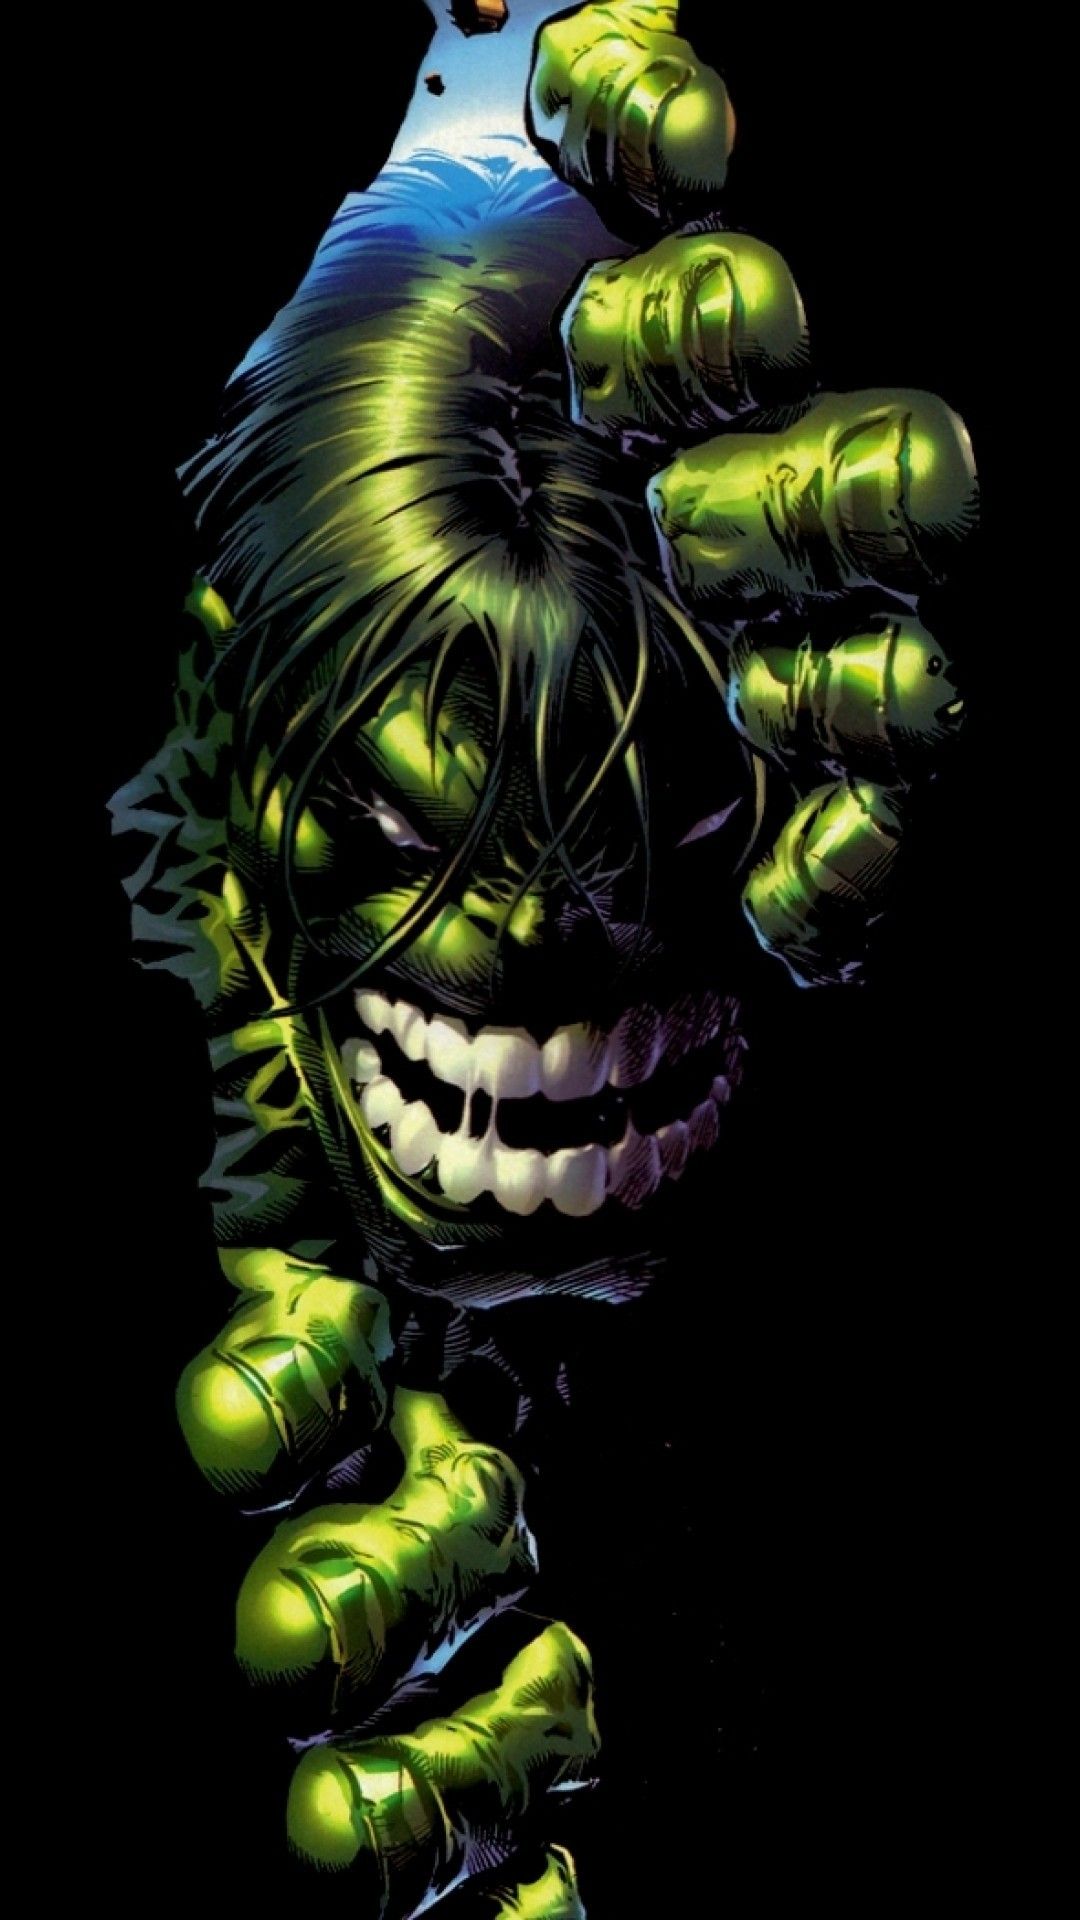 Download 1080x1920 Hulk, Comic, Marvel Wallpaper for iPhone iPhone 7 Plus, iPhone 6+, Sony Xperia Z, HTC One